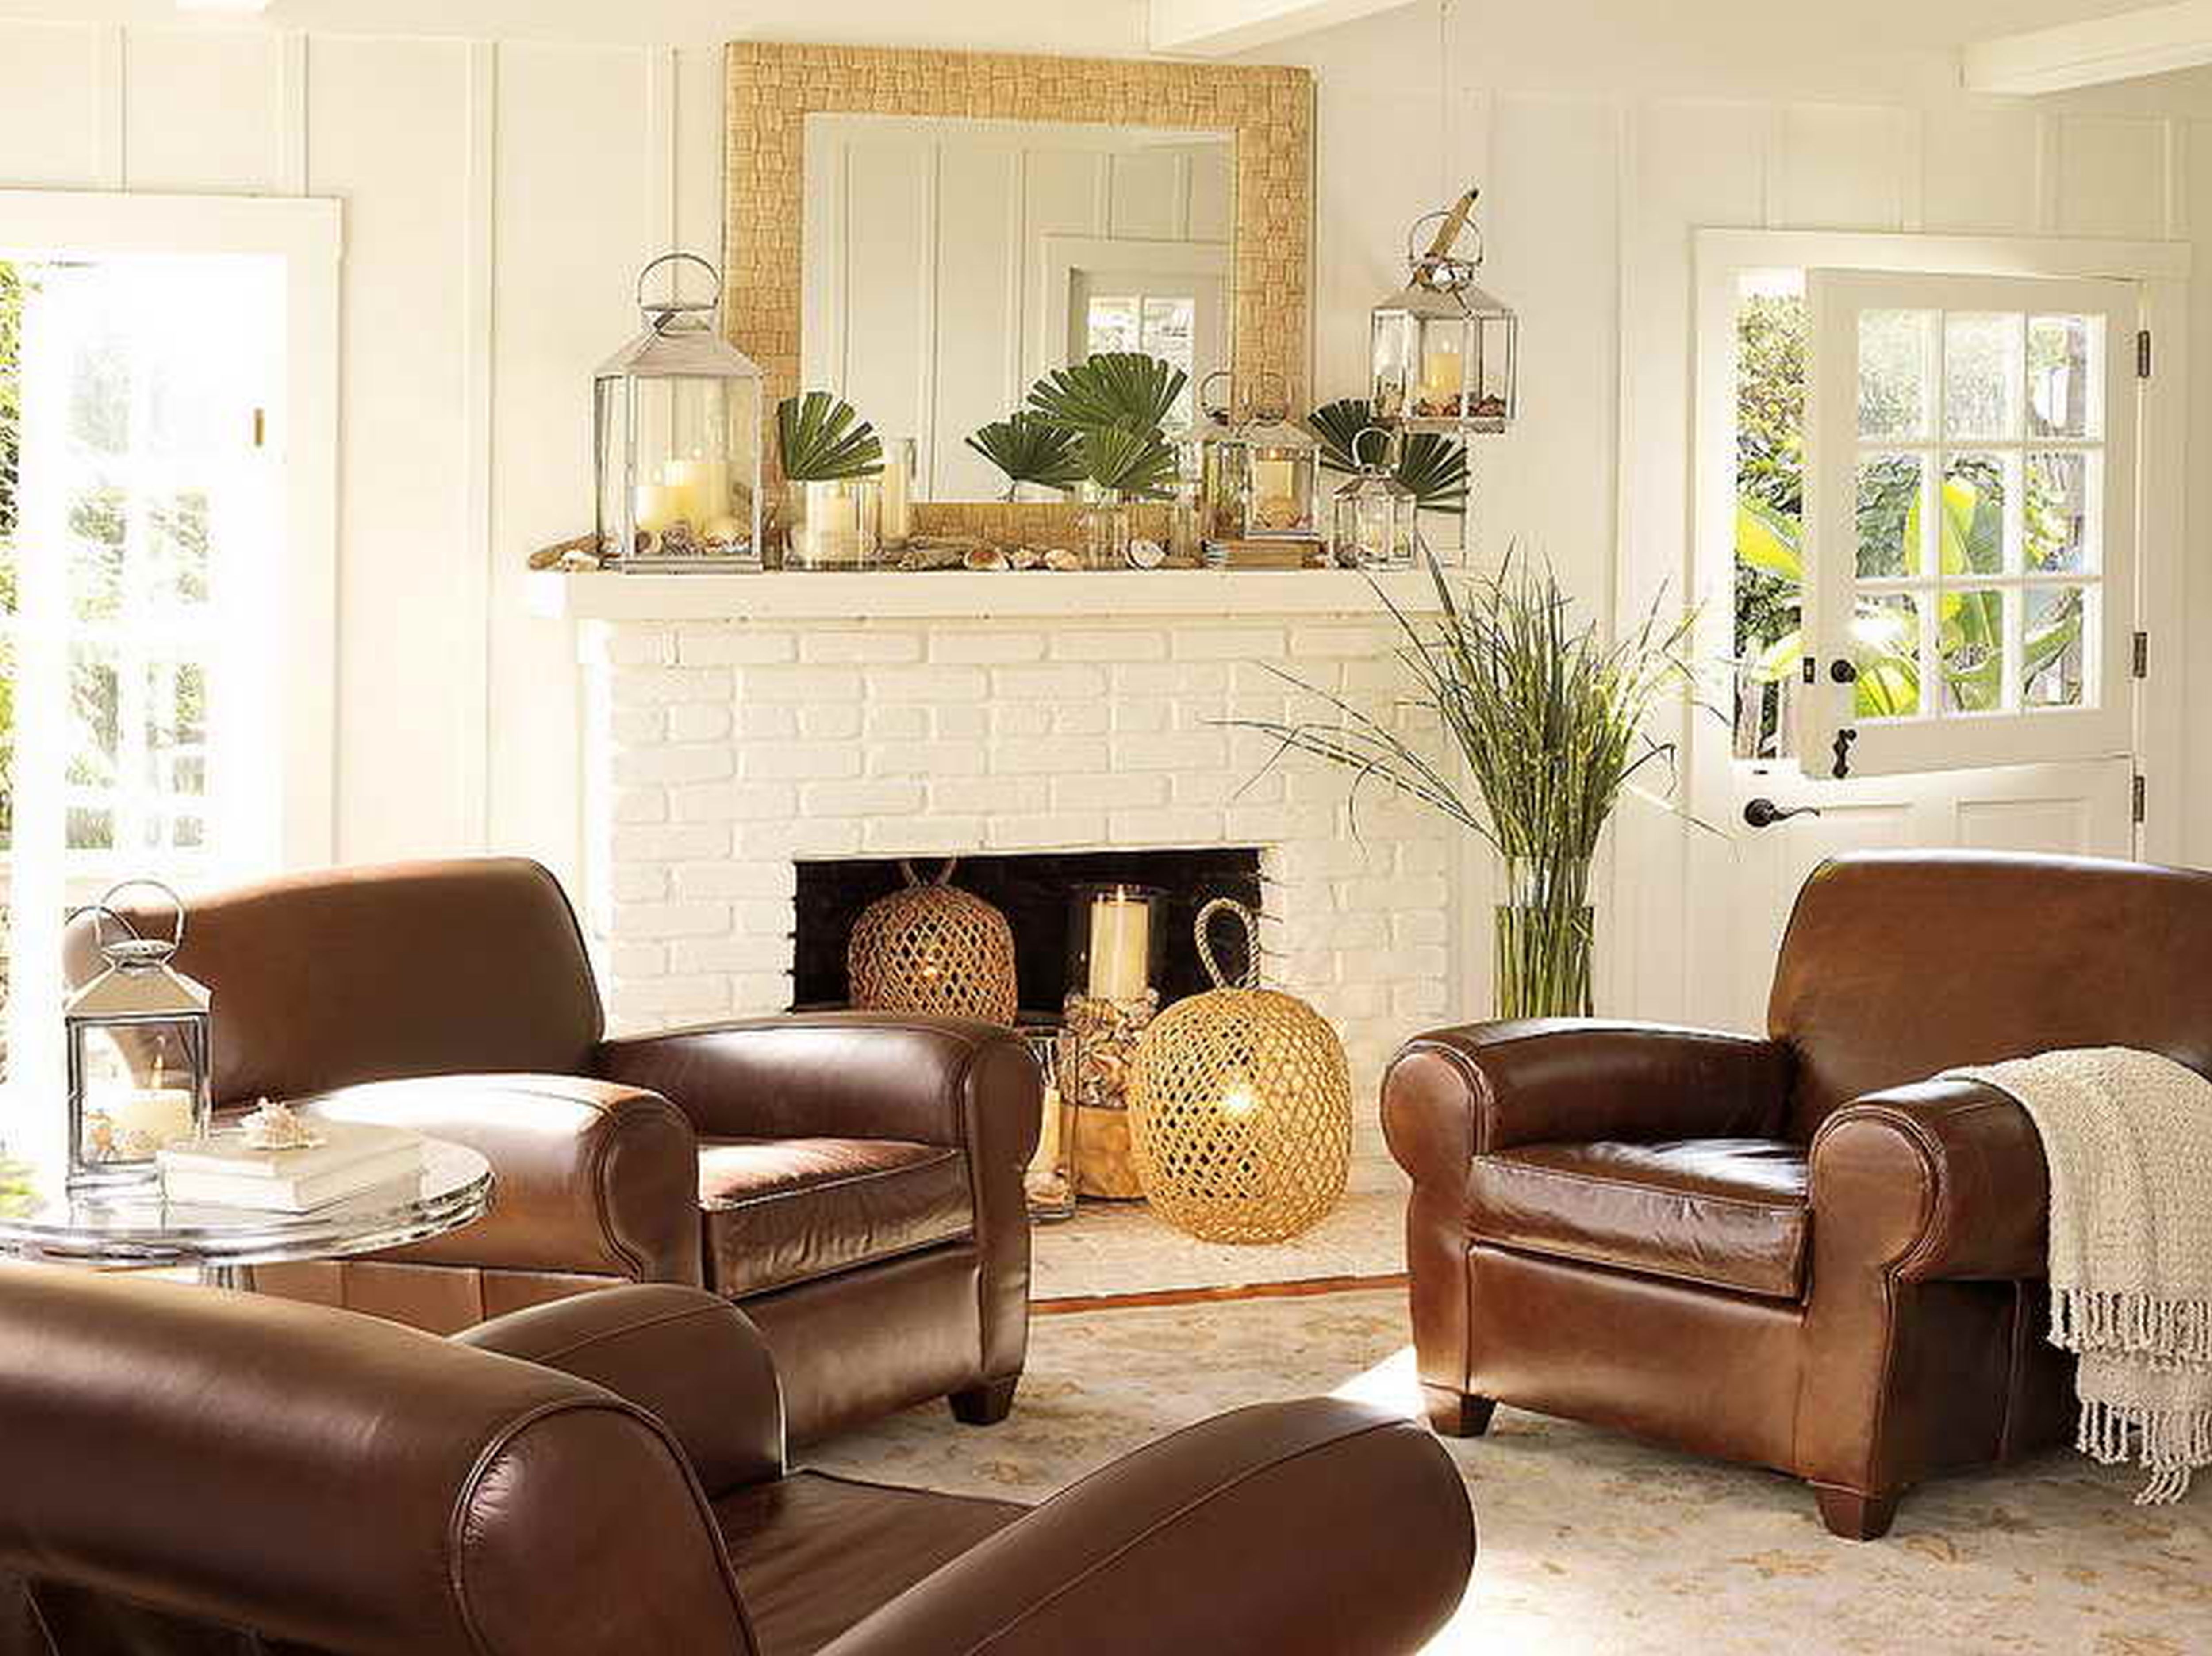 decor brown decorating furniture inexpensive color leather living sofa walls room dark fireplace decoration paint rooms good colors mantel look